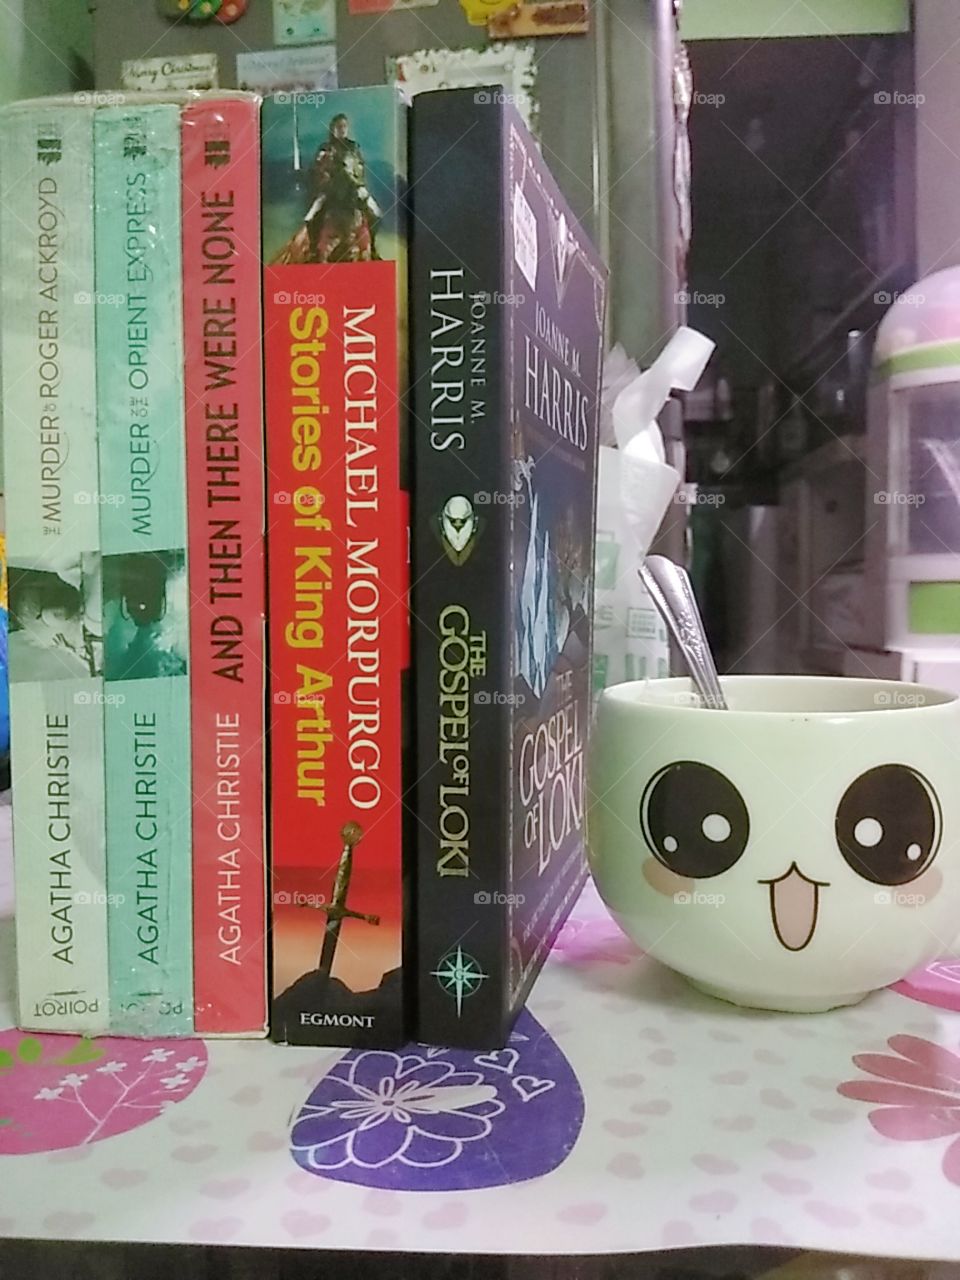 books with a side of tea